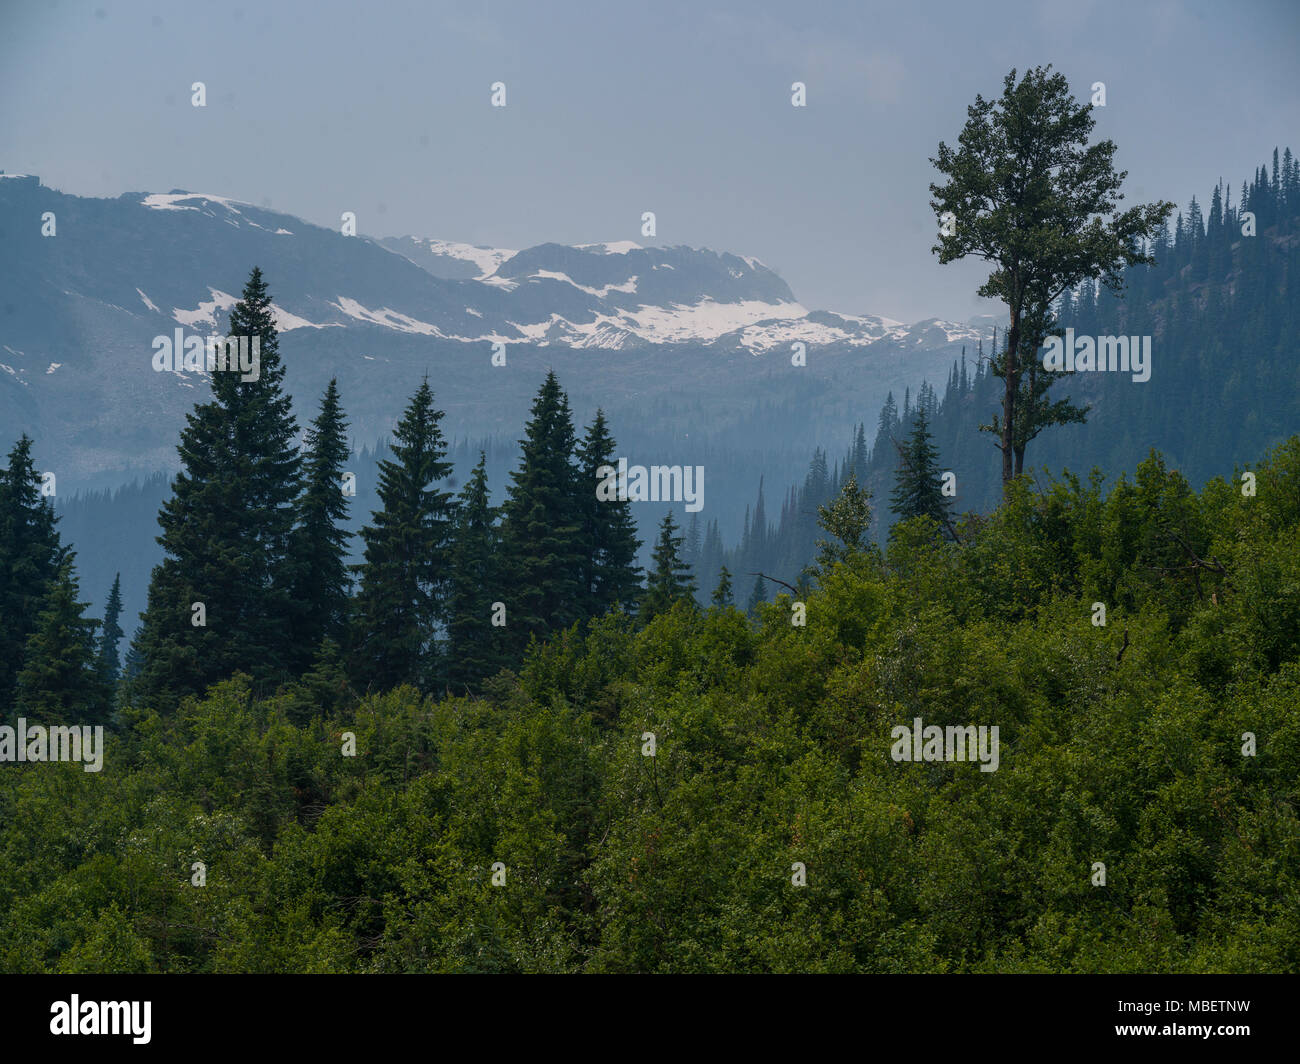 Trees with snow covered mountain range in the background, Revelstoke, British Columbia, Canada Stock Photo